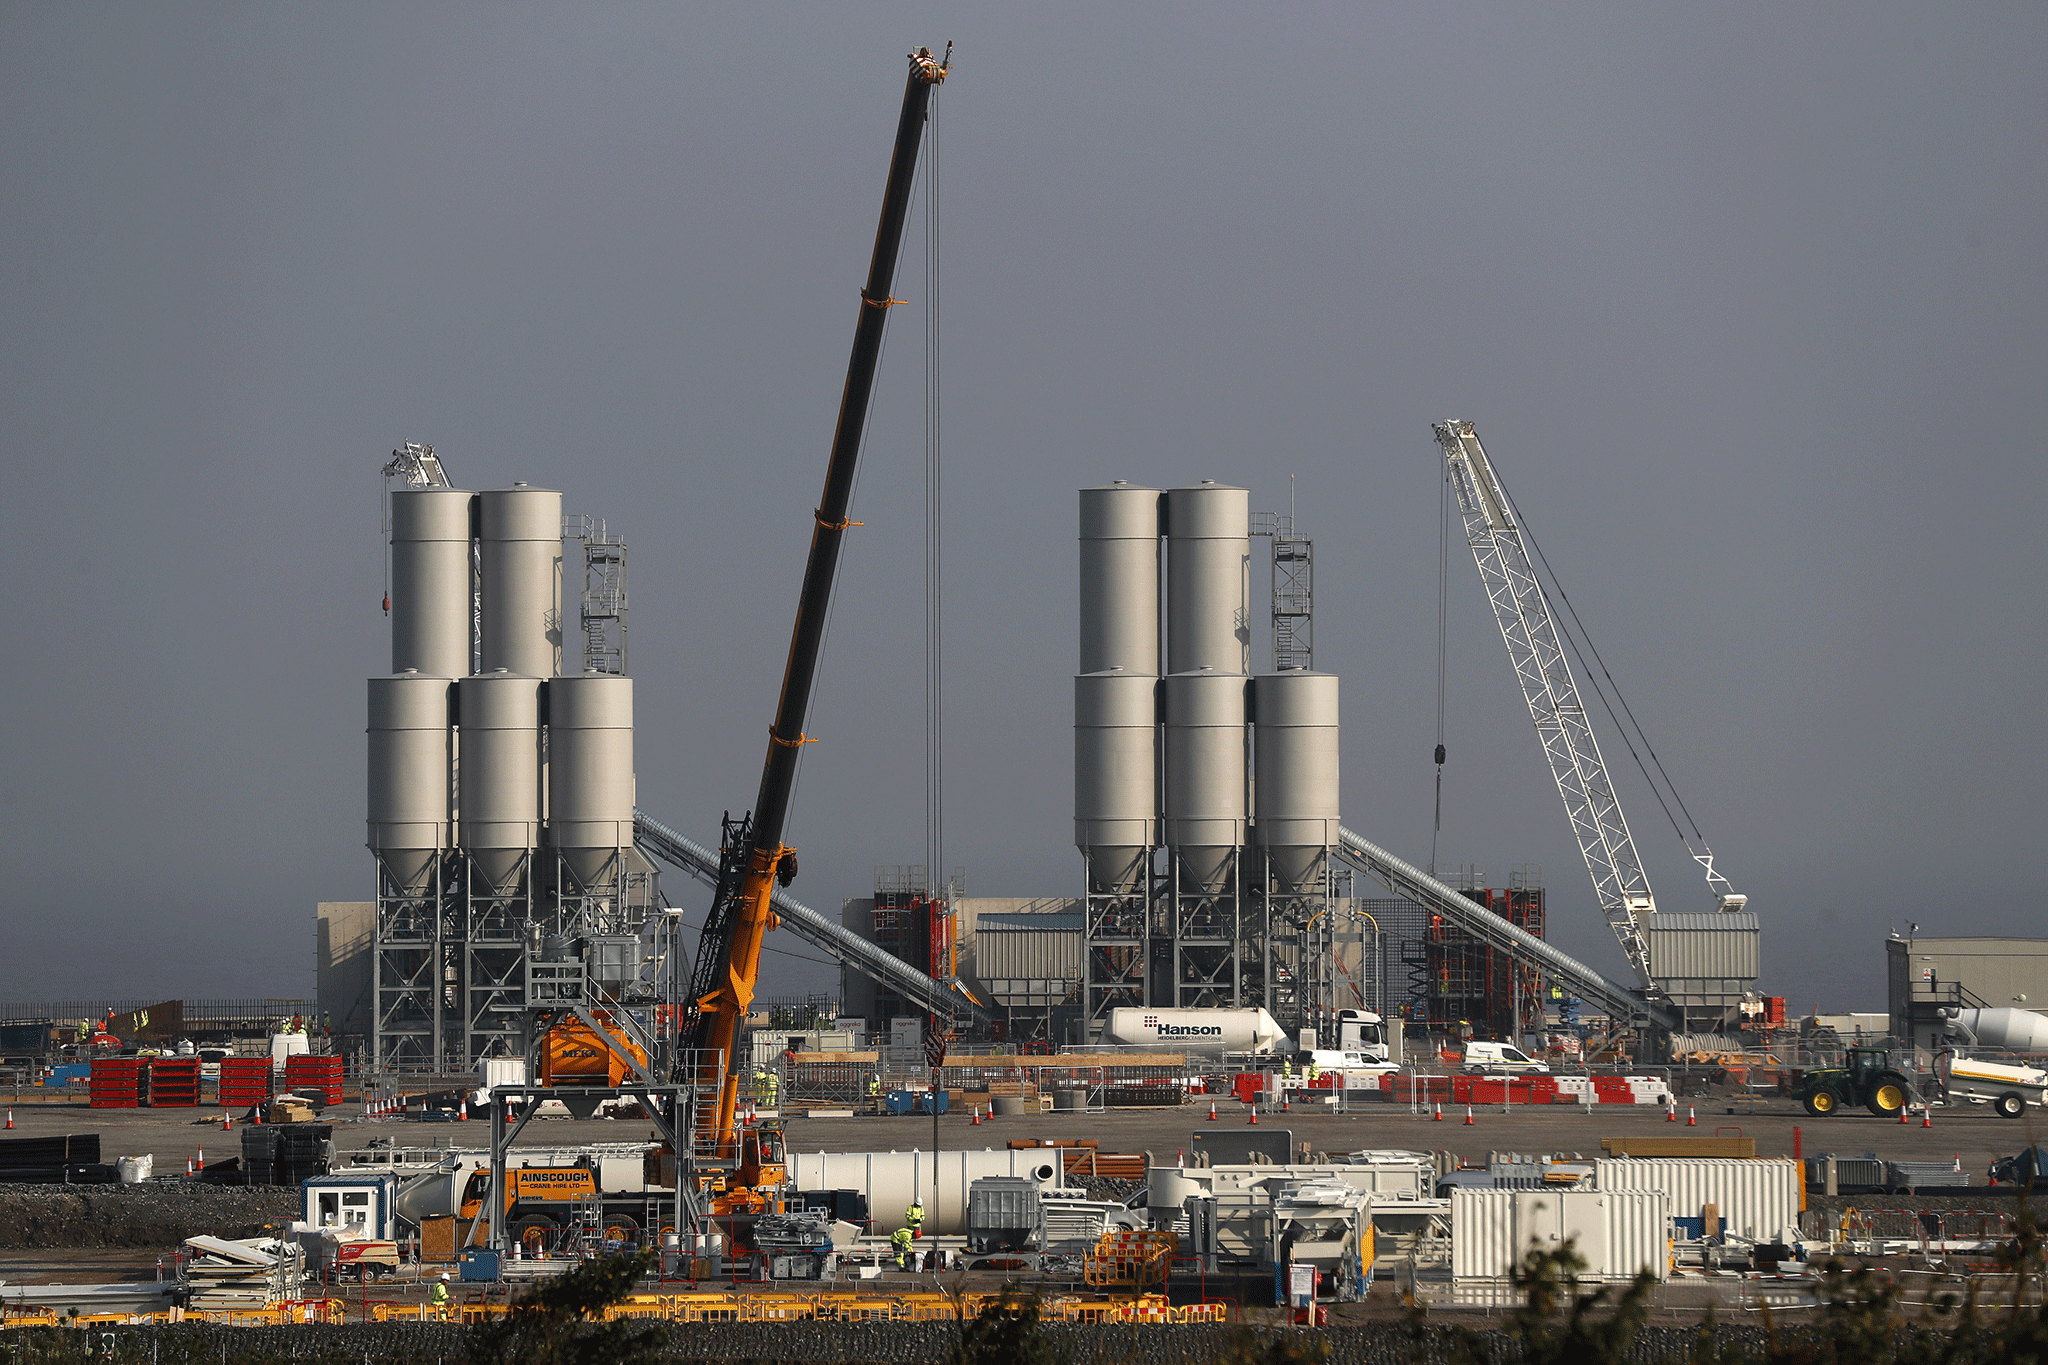 The now-approved Hinkley could turn out to be an enormous white elephant – May was right to have her doubts